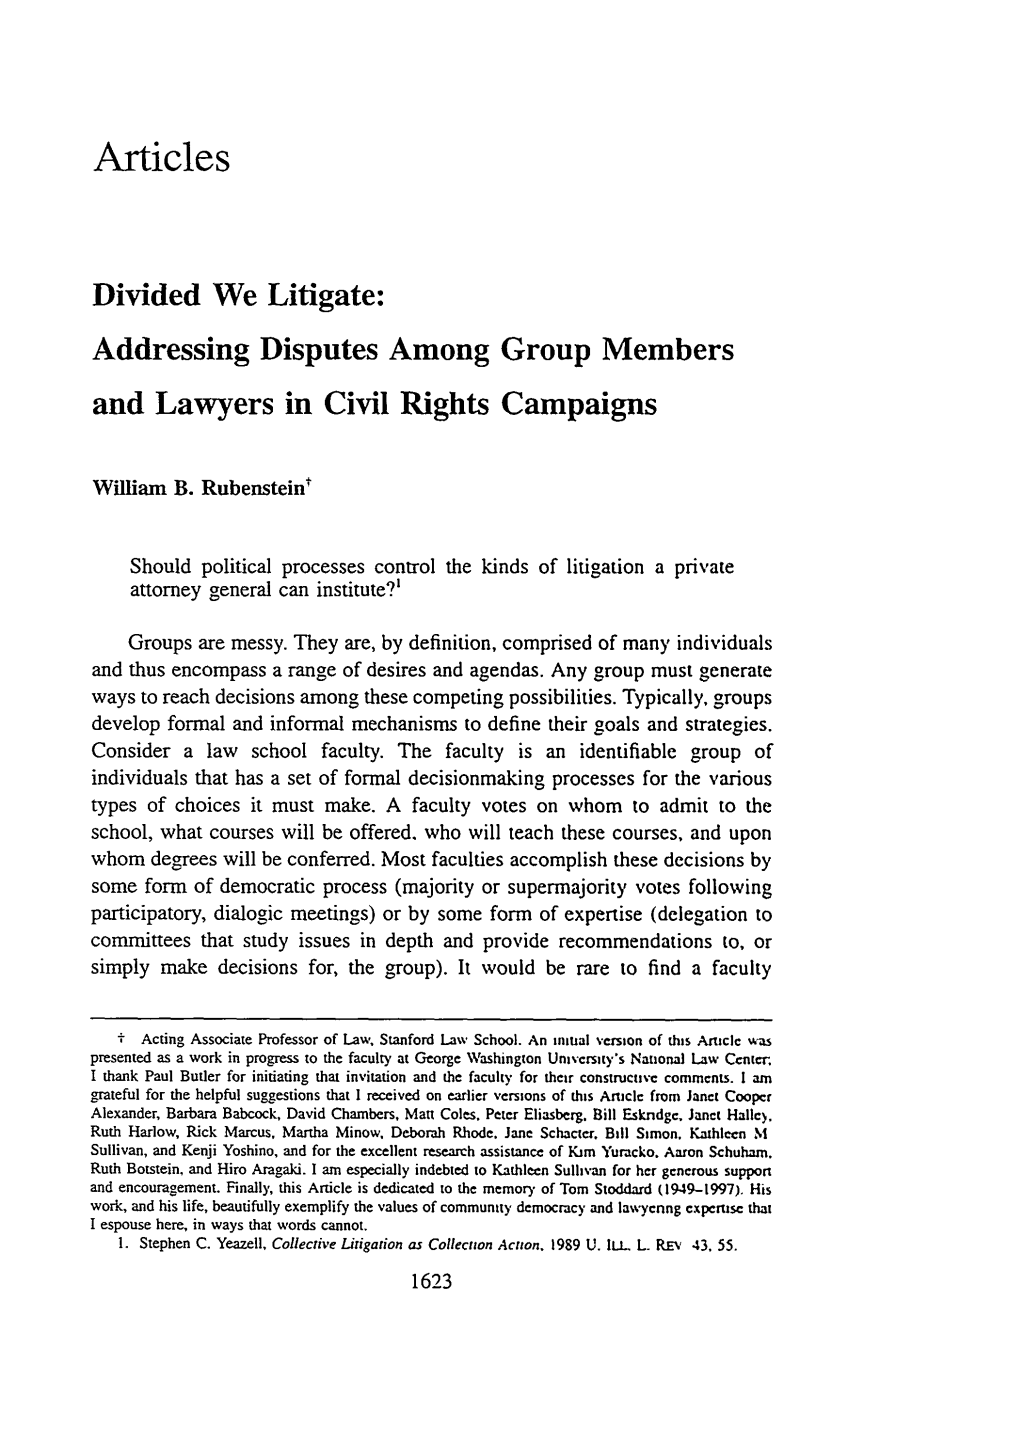 Divided We Litigate: Addressing Disputes Among Group Members and Lawyers in Civil Rights Campaigns